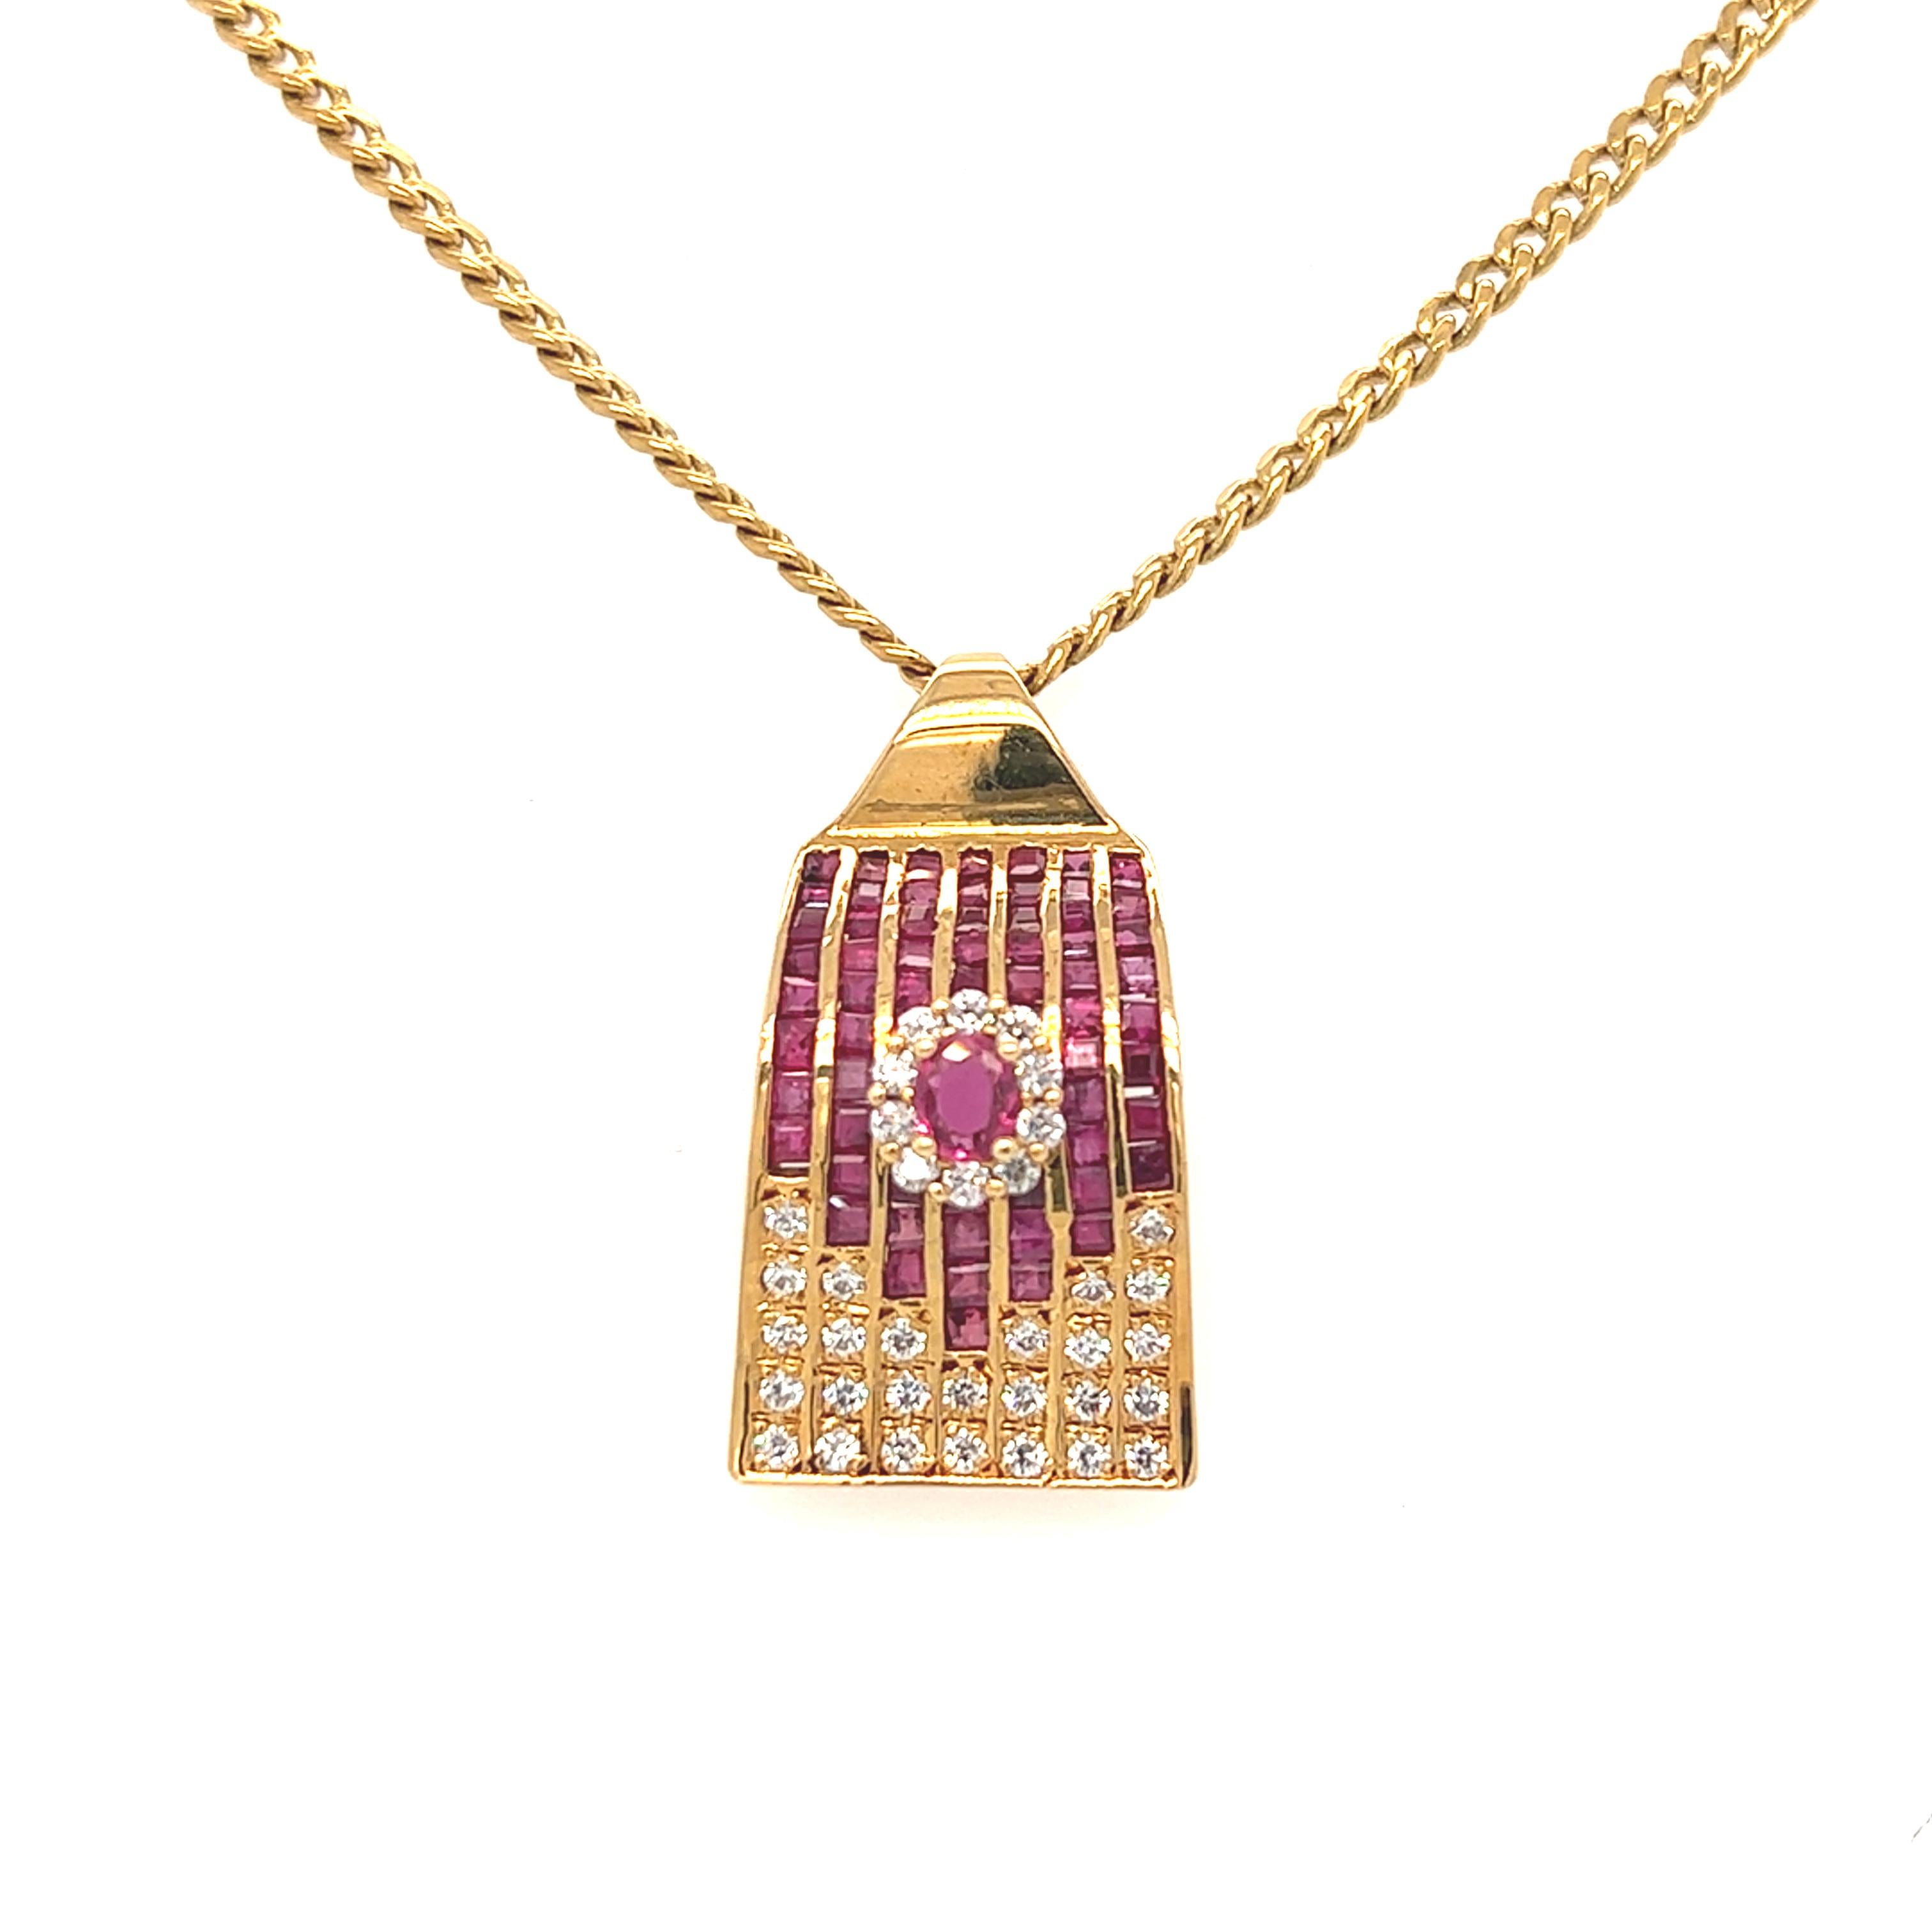 Retro Ruby Diamond Pendant Necklace and Huggie Hoop Earrings Set 18K Yellow Gold In Excellent Condition For Sale In beverly hills, CA